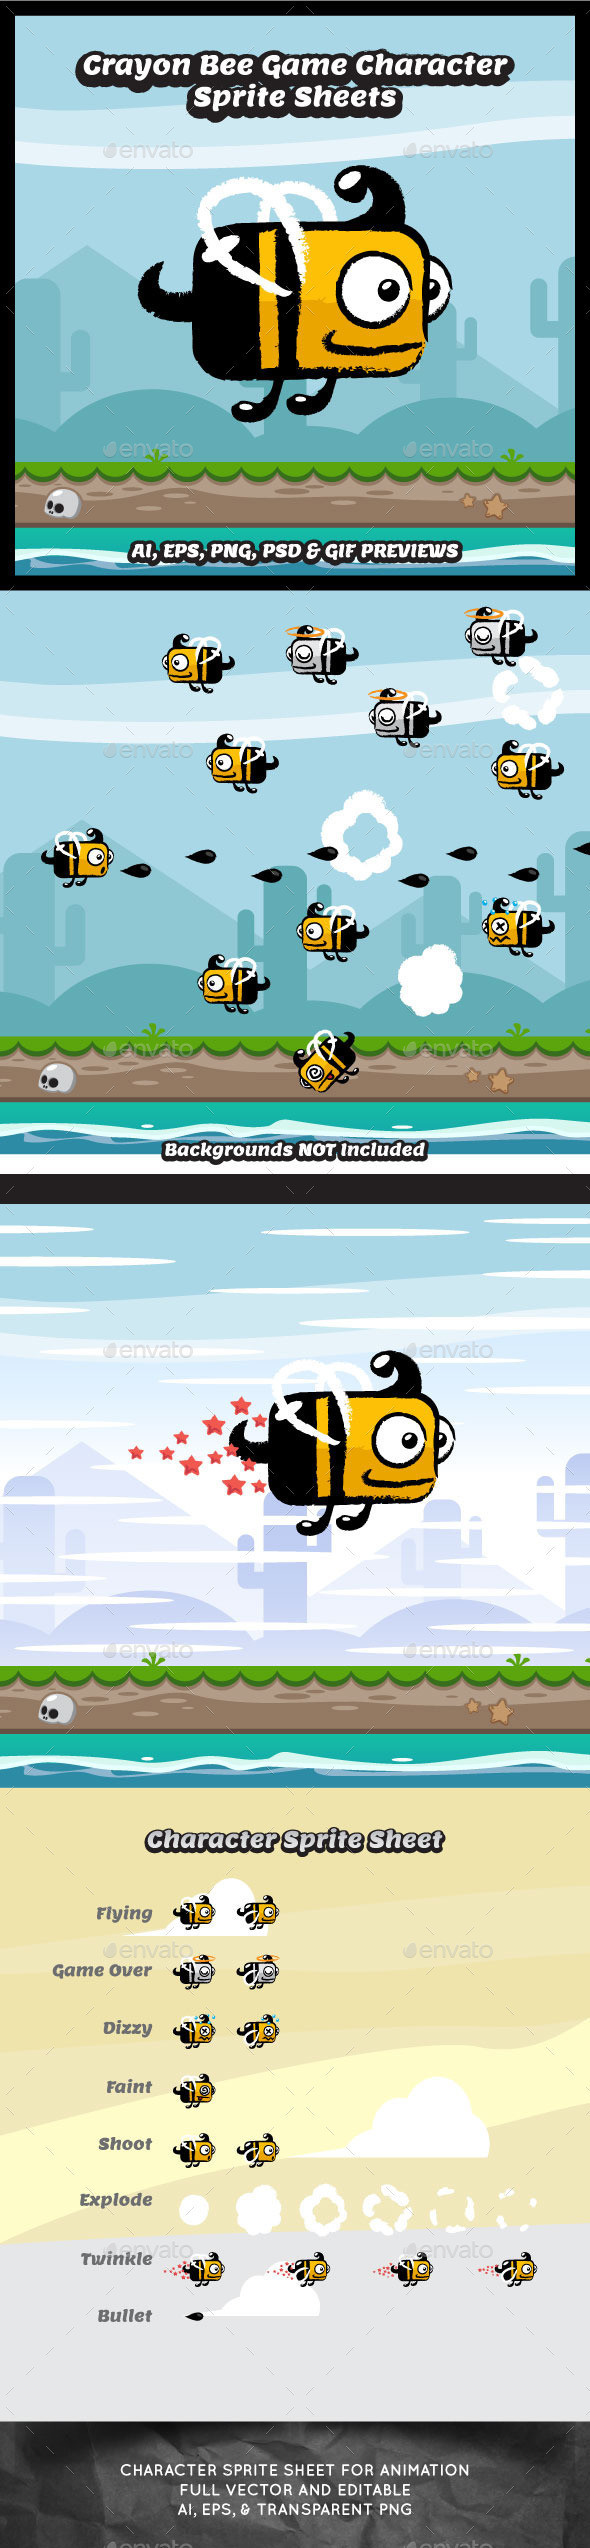 Crayon bee game character sprite sheet game asset flappy games gameart game art crayon style game character 590